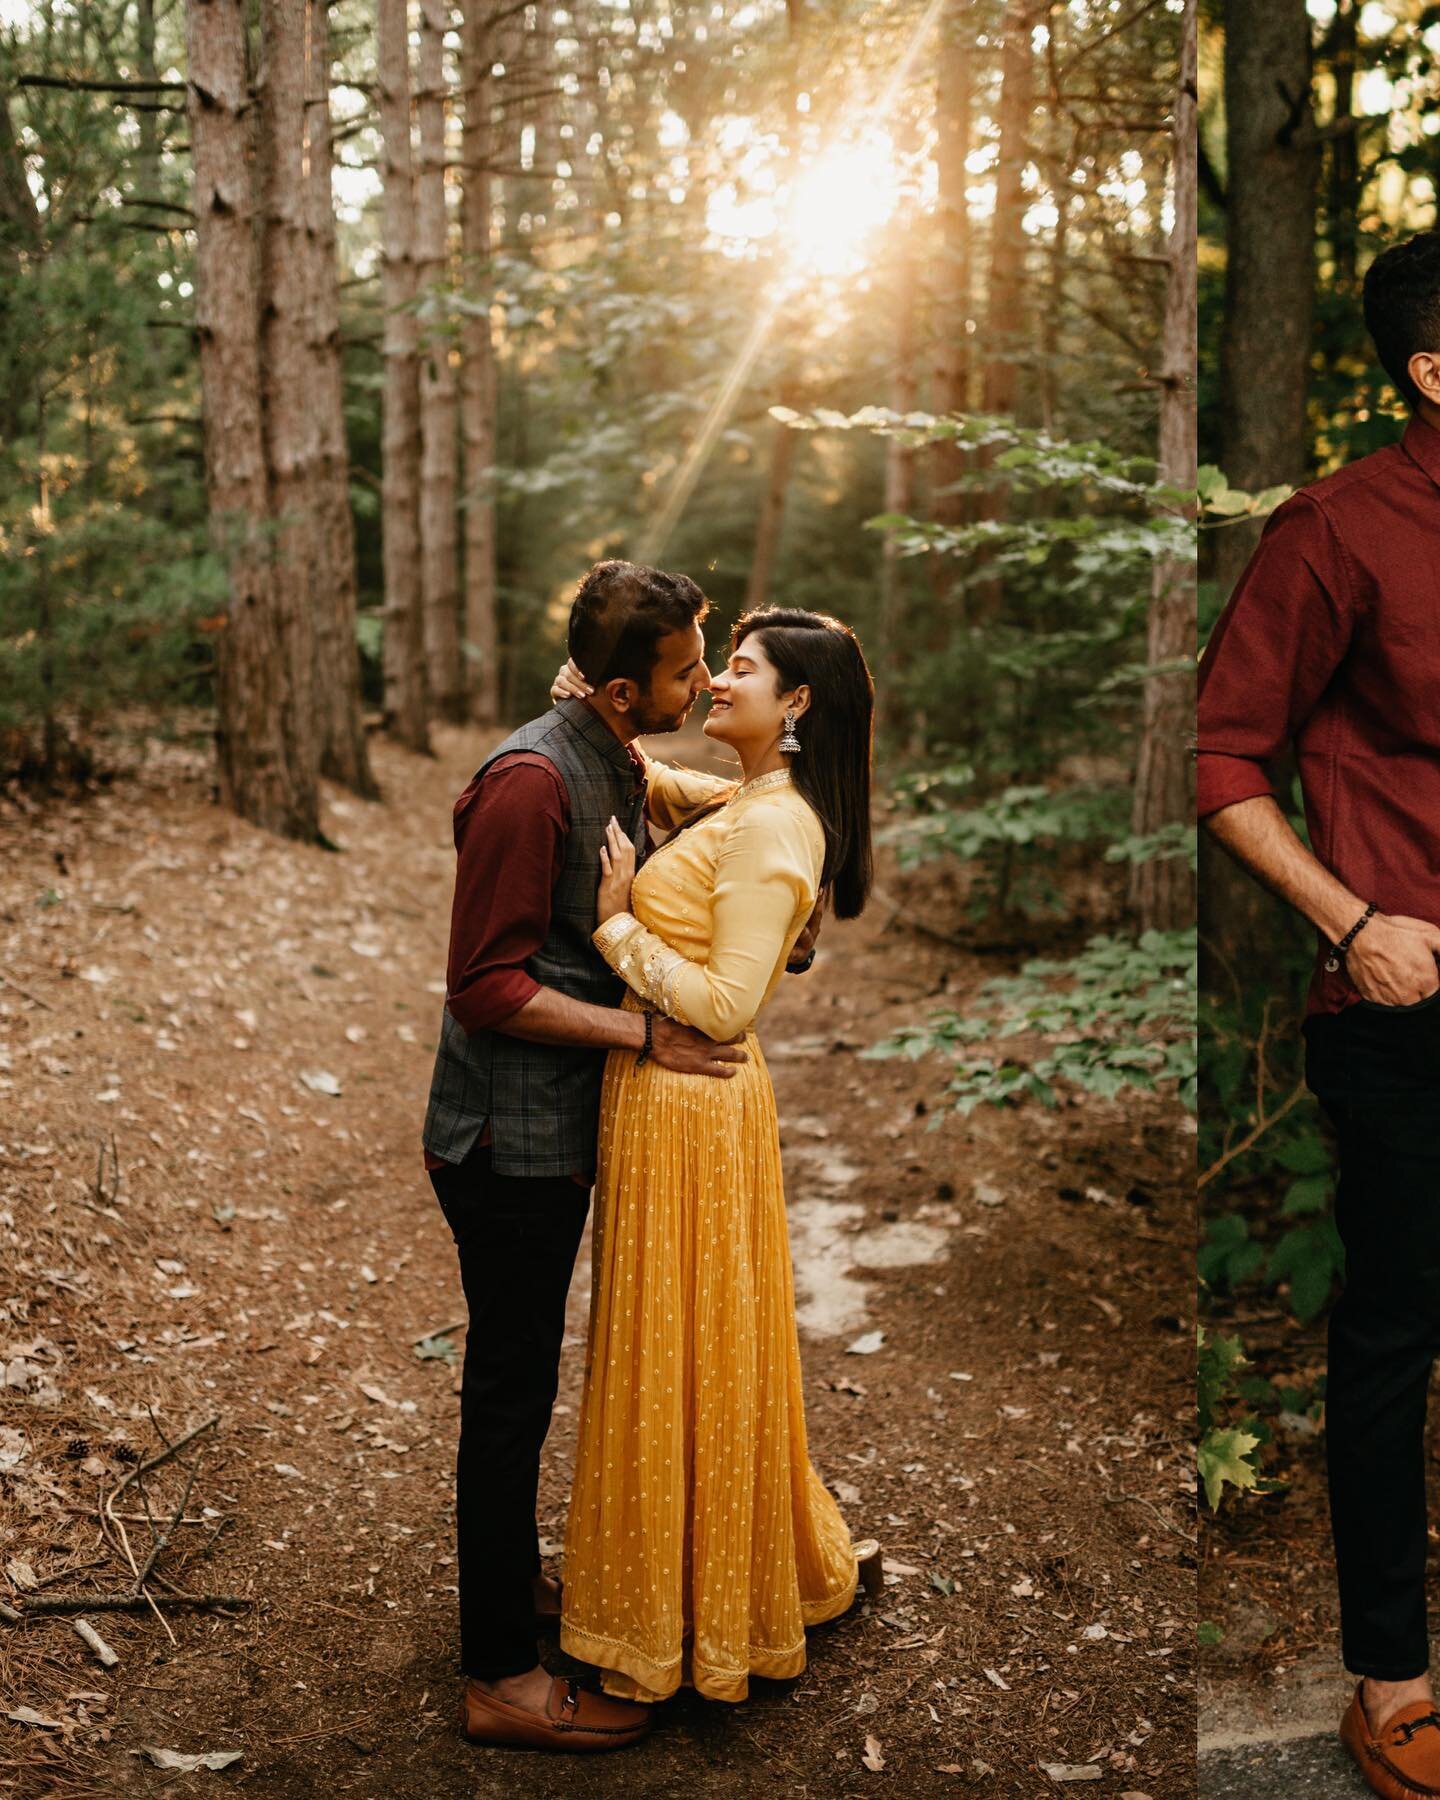 I had so much fun with sweet Deeksha &amp; Shriram on the beautiful shores of Lake Michigan. These two are so lovely together and so dang beautiful! Cheers, loves! 🥰🥰🥰